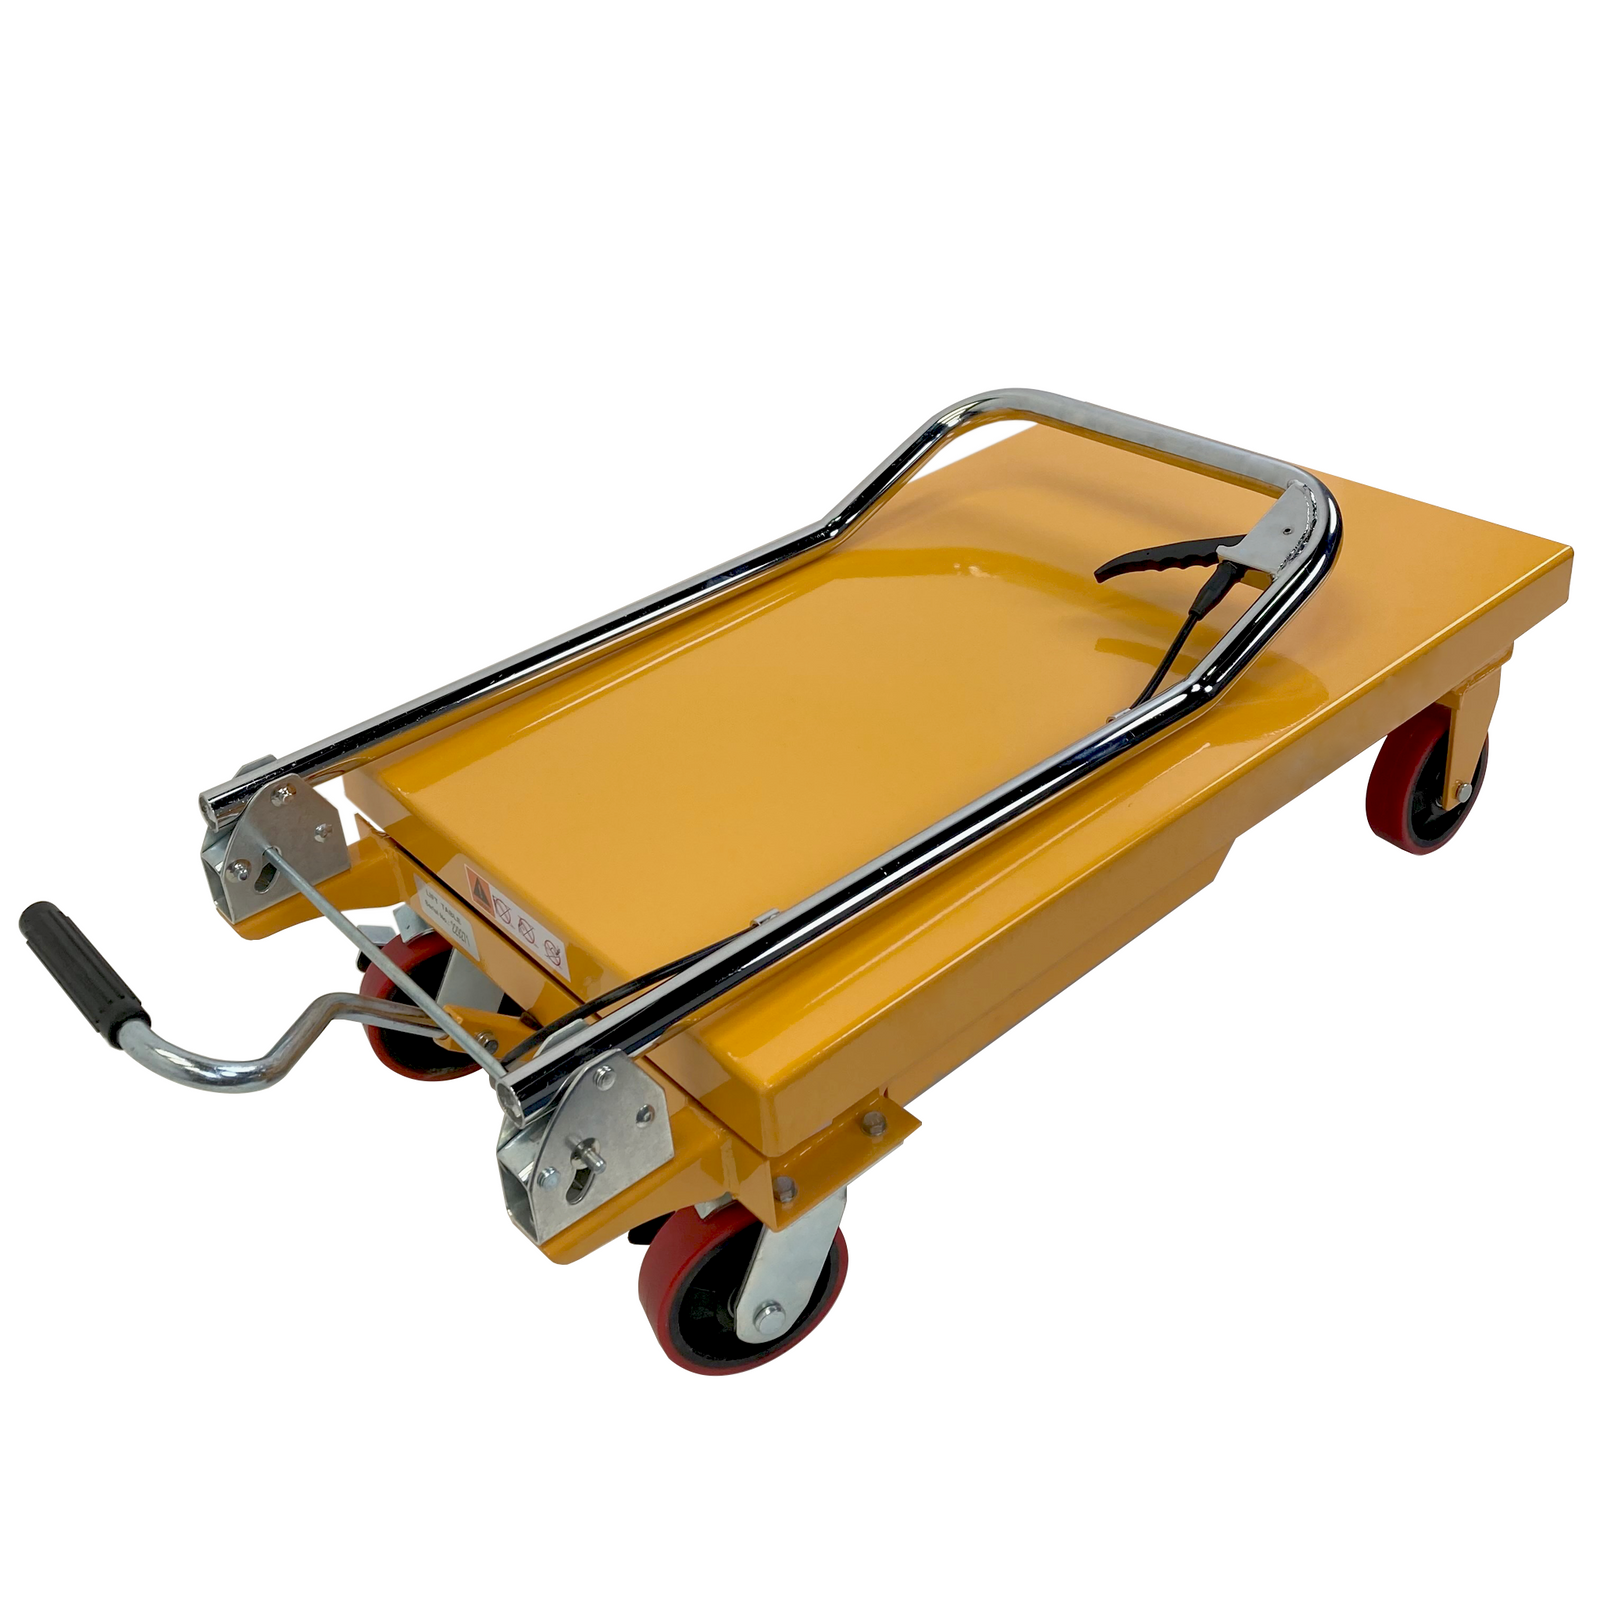 Showing the yellow table lift for 150 kilograms with the handle of the JORES TECHNOLOGIES® scissor table lift collapsed to make it less bulky when storage or for transportation. Also shows all 4 red rubber heavy duty wheels. Back wheels of the lift table have brakes